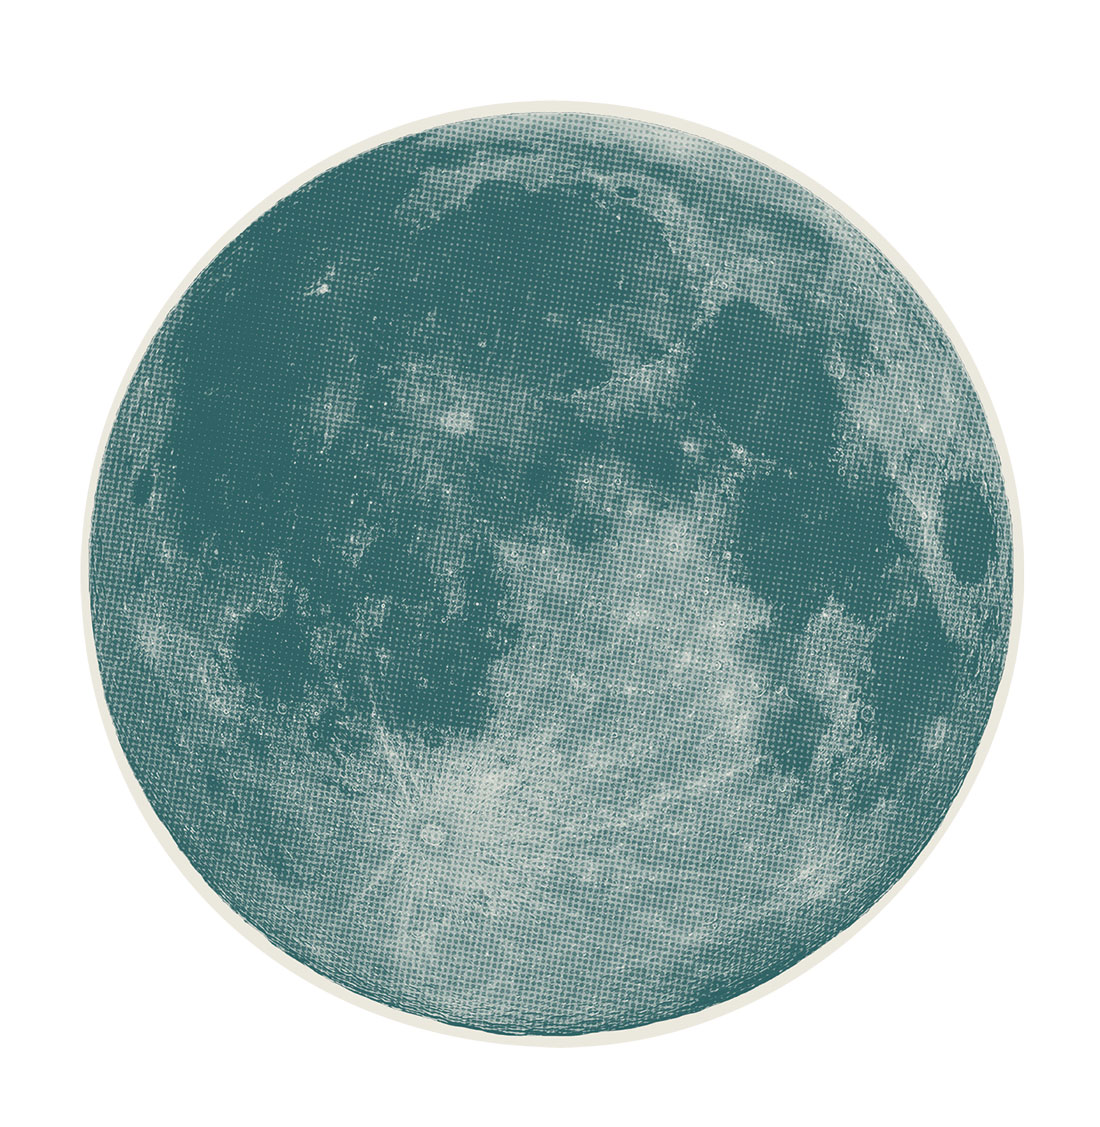 Cutout of the moon overlayed in a light aqua blue color. 